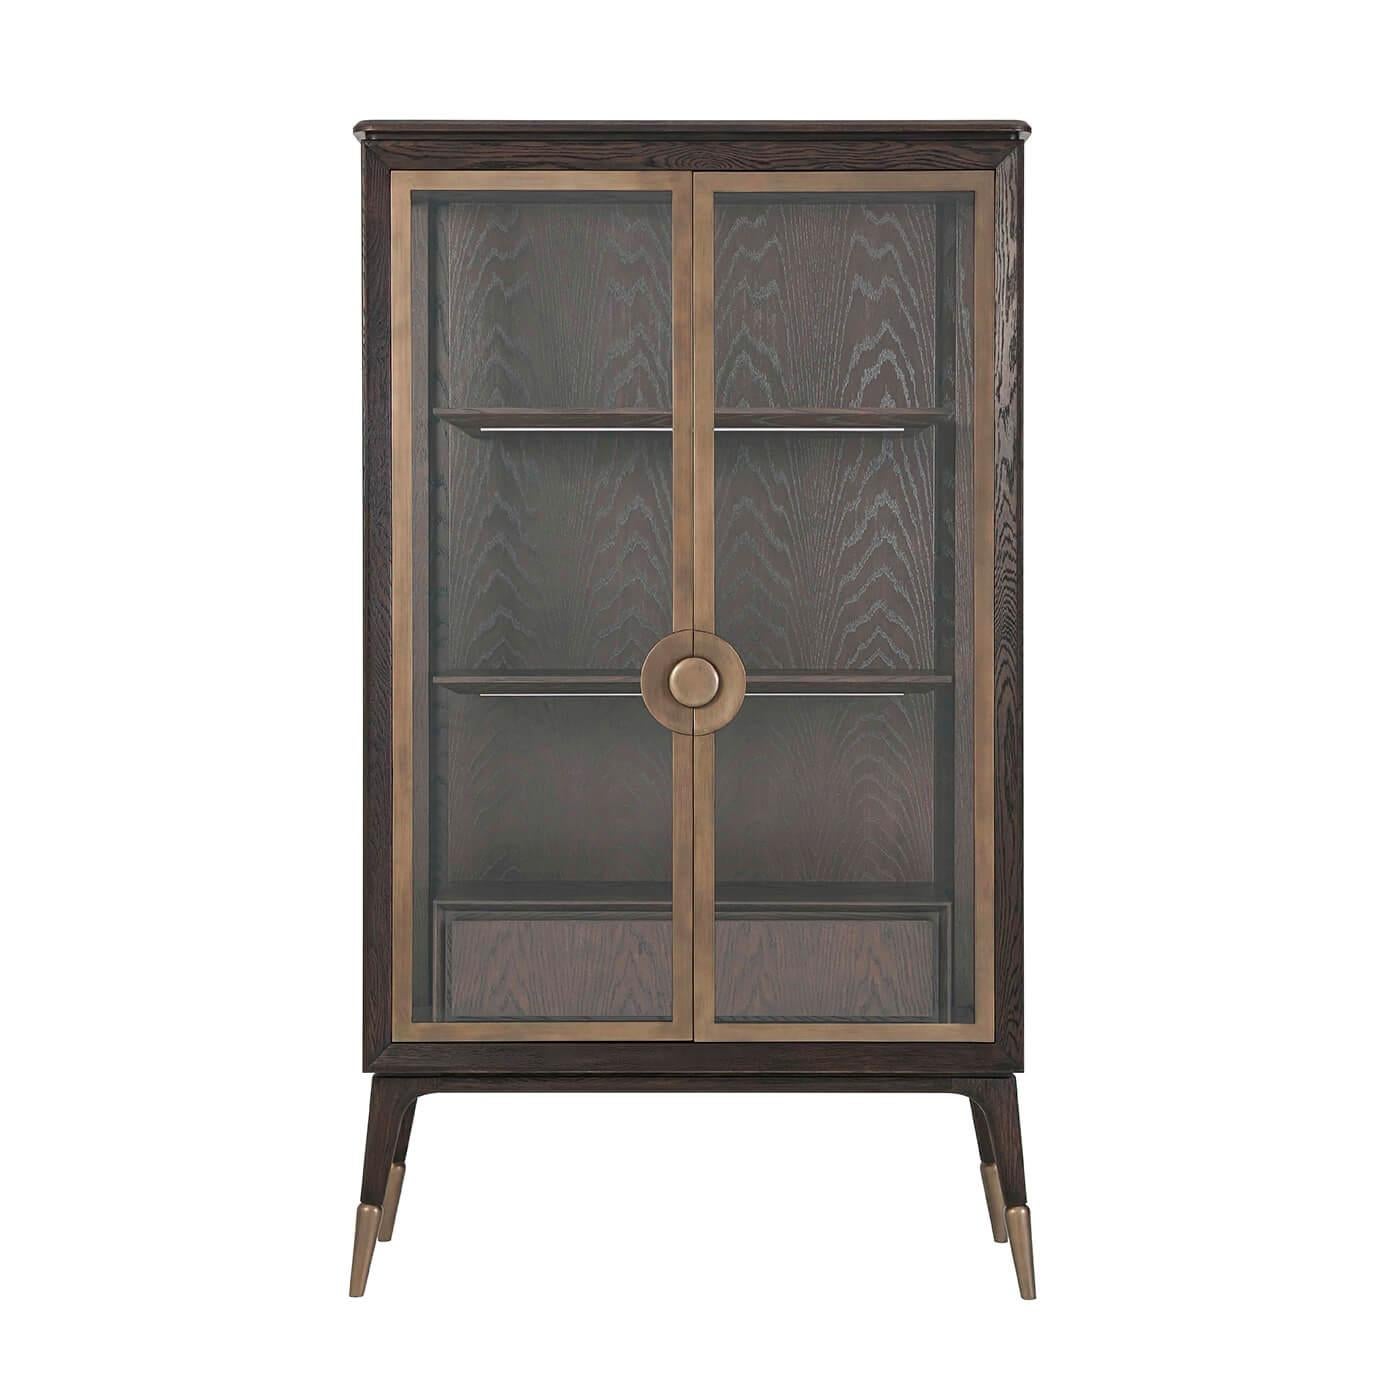 Midcentury style display cabinet with a wire-brushed oak and crown oak veneer 'cigar club' finish, glazed doors enclosing a lit interior with floating shelves and drawer box, our 'Heritage Bronze' finished legs, handle and door frame on splayed legs